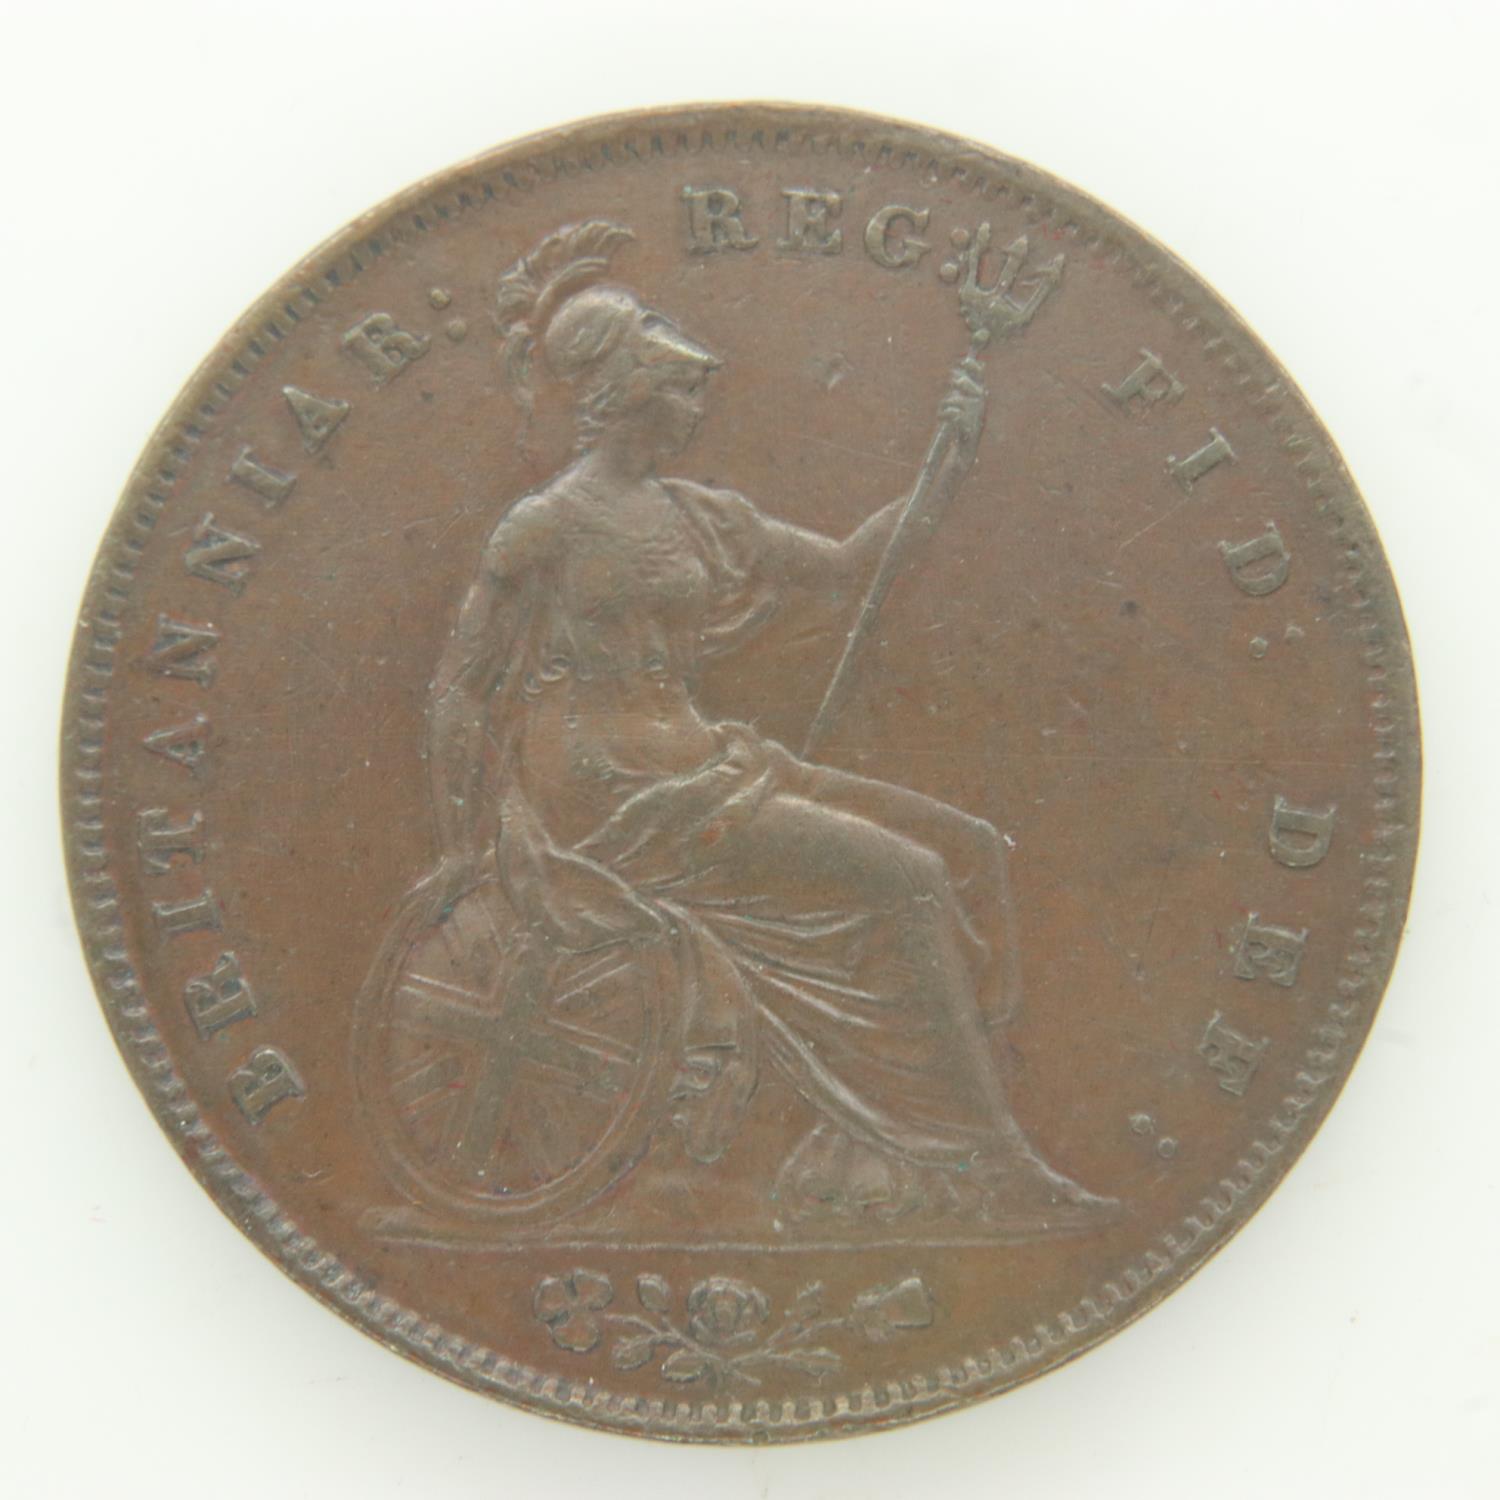 1858 penny of Queen Victoria - nEF grade. UK P&P Group 0 (£6+VAT for the first lot and £1+VAT for